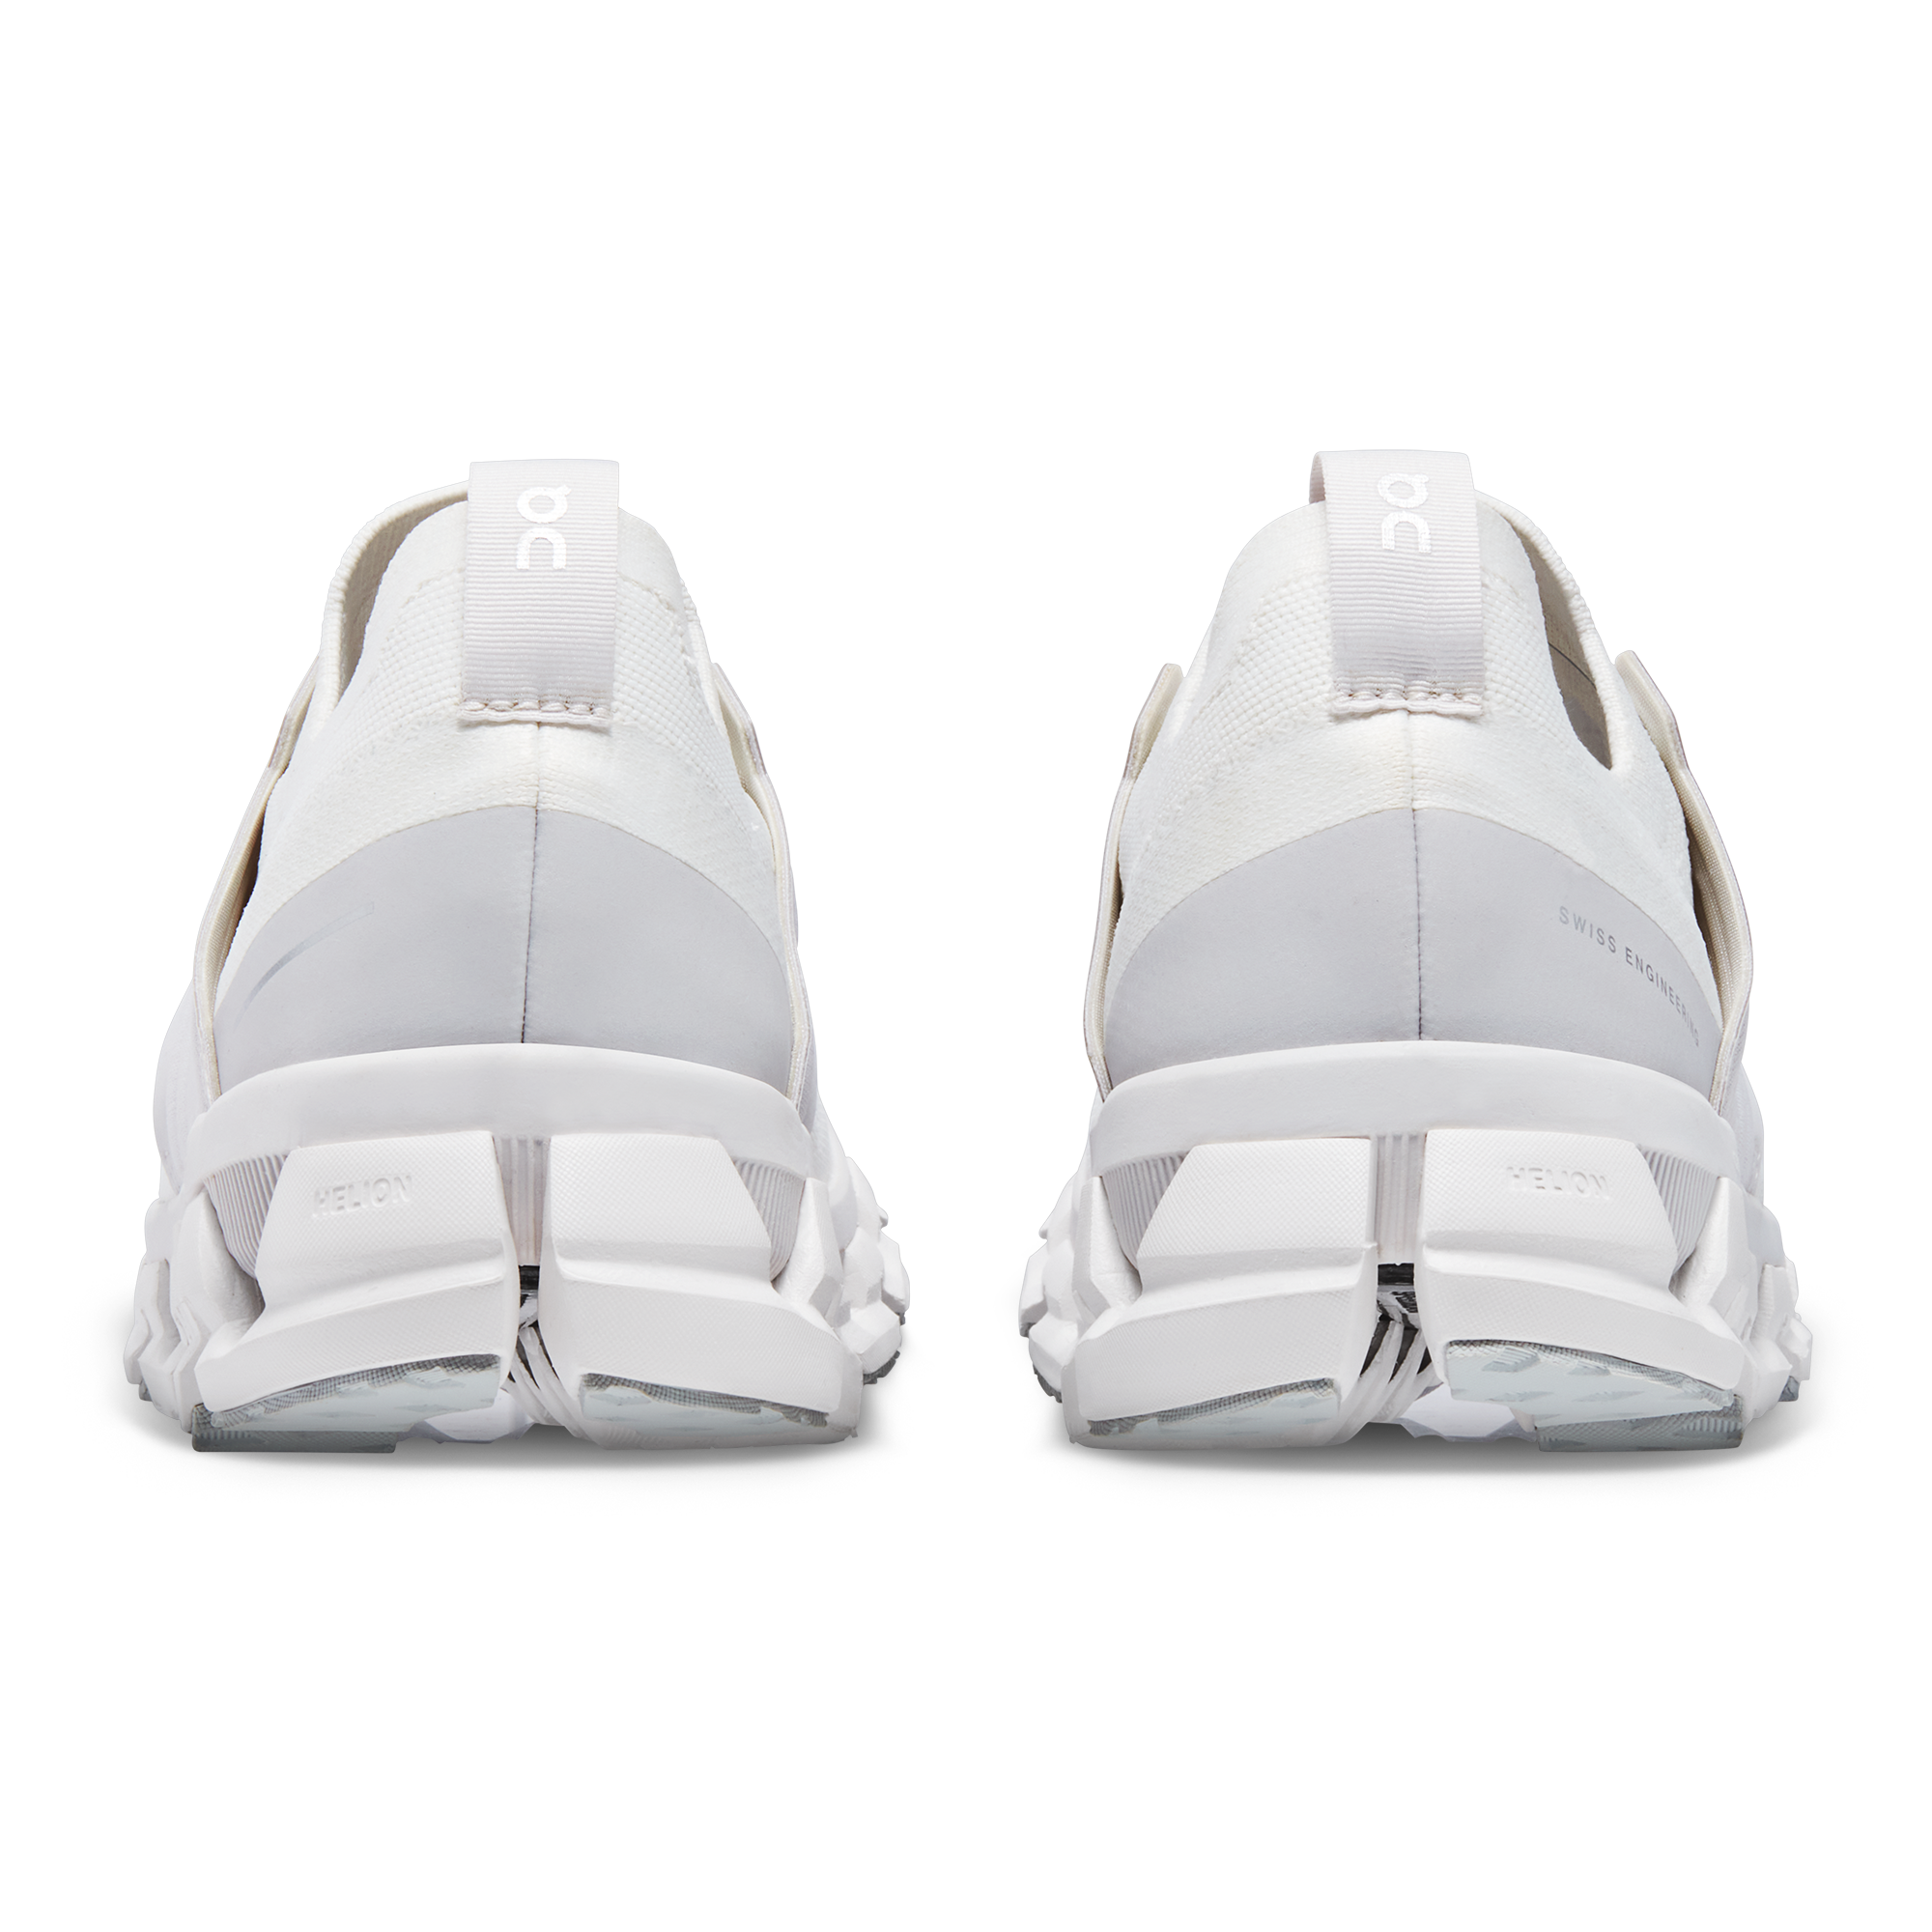 Women's Cloudswift 3 | White & Frost | On United States